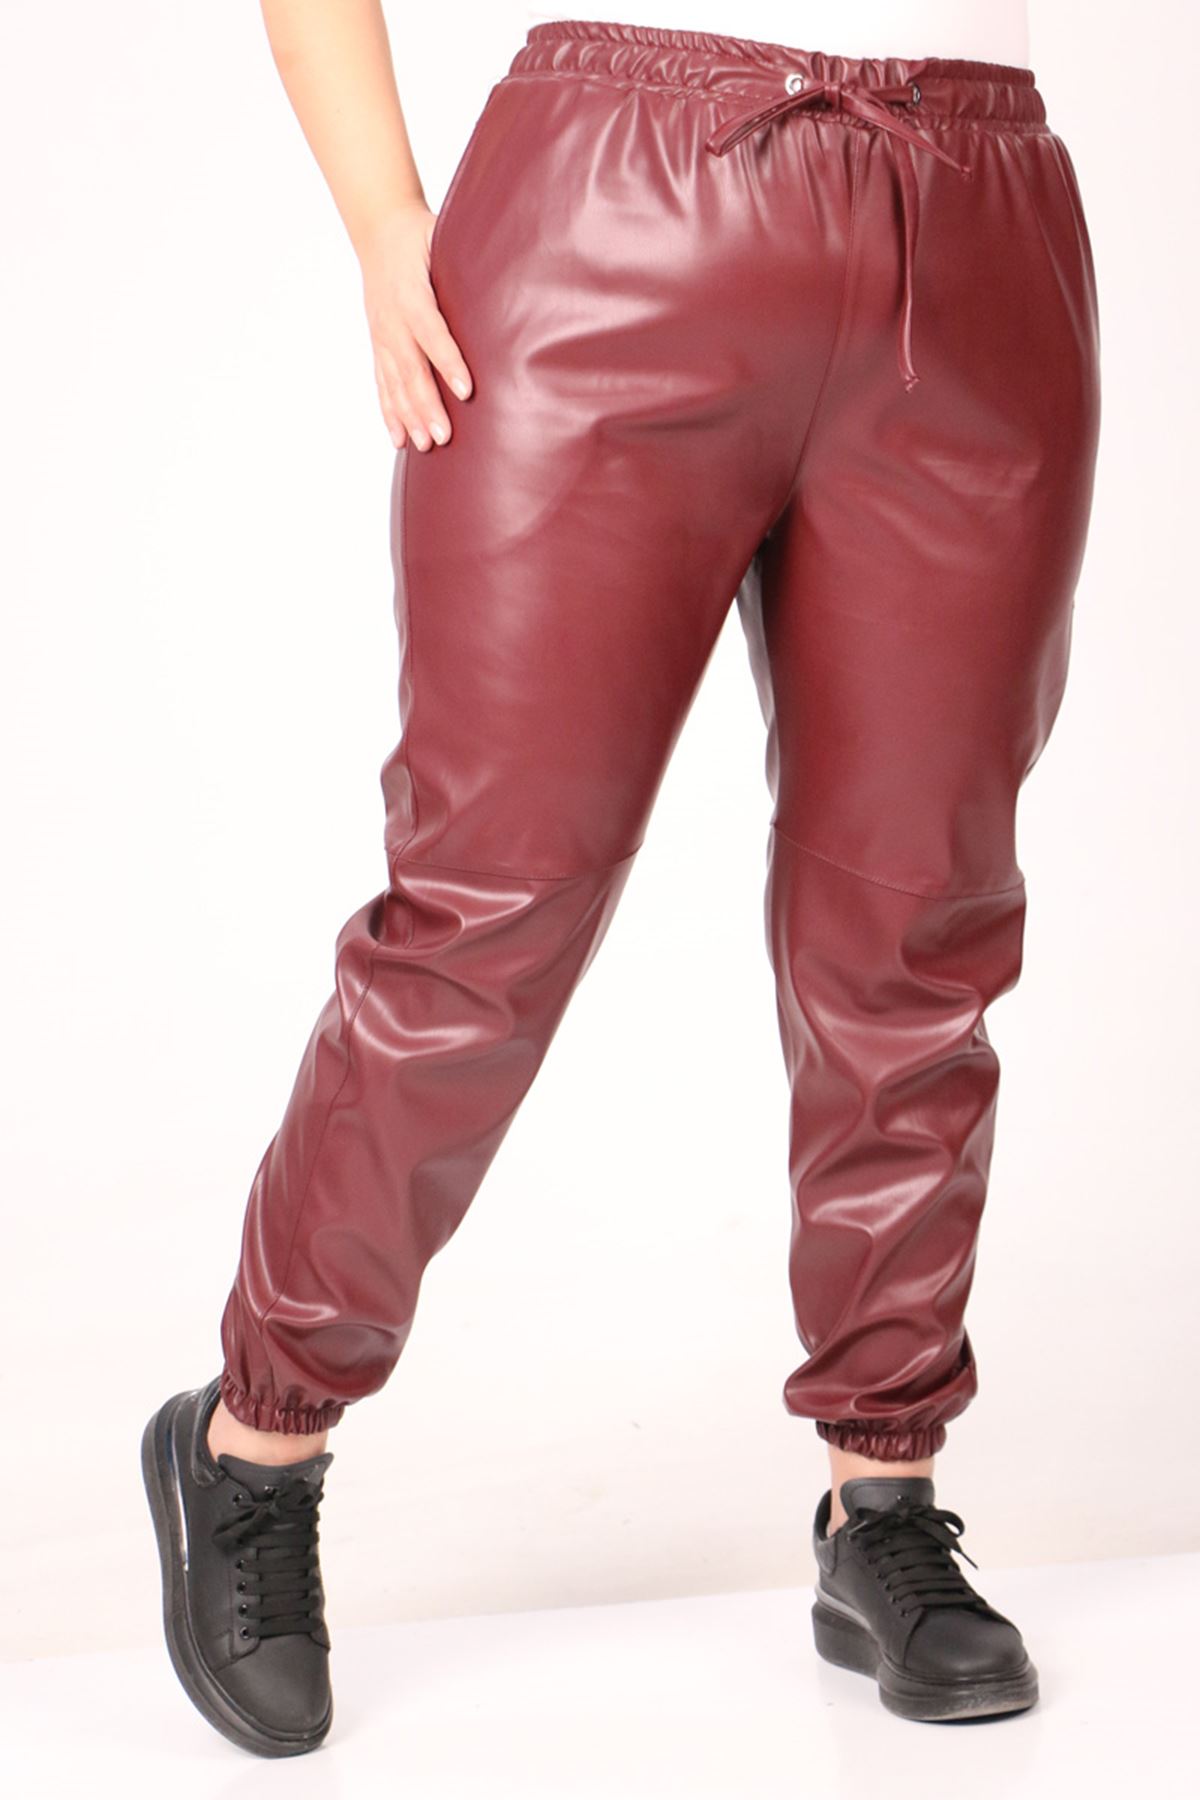 39051 Large Size Leather Trousers with Elastic Legs-Burgundy